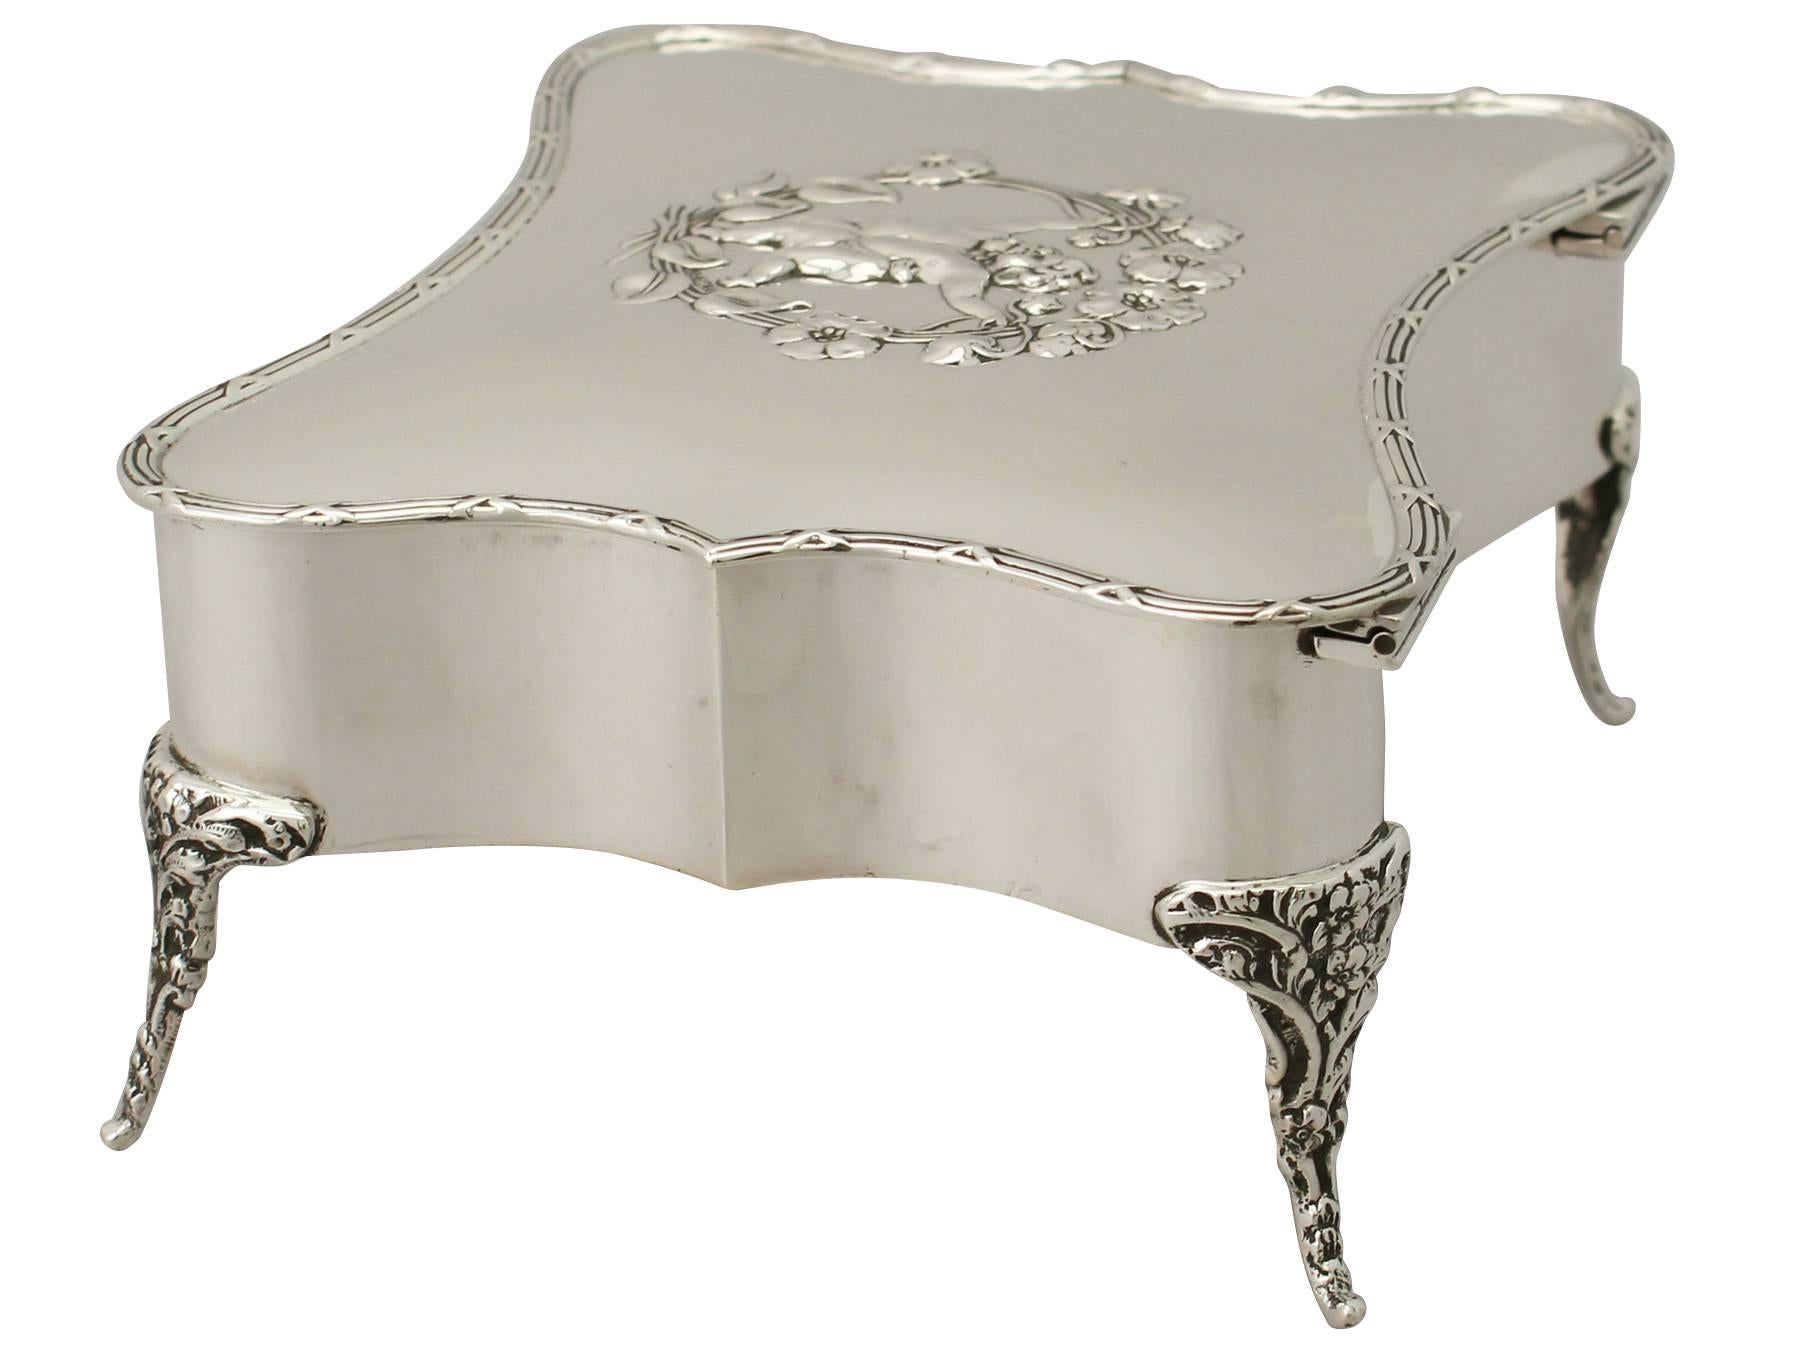 An exceptional, fine and impressive, large antique Edwardian English sterling silver jewelry box; an addition to our ornamental silverware collection.

This exceptional antique Edwardian sterling silver jewelry box has a serpentine shaped form